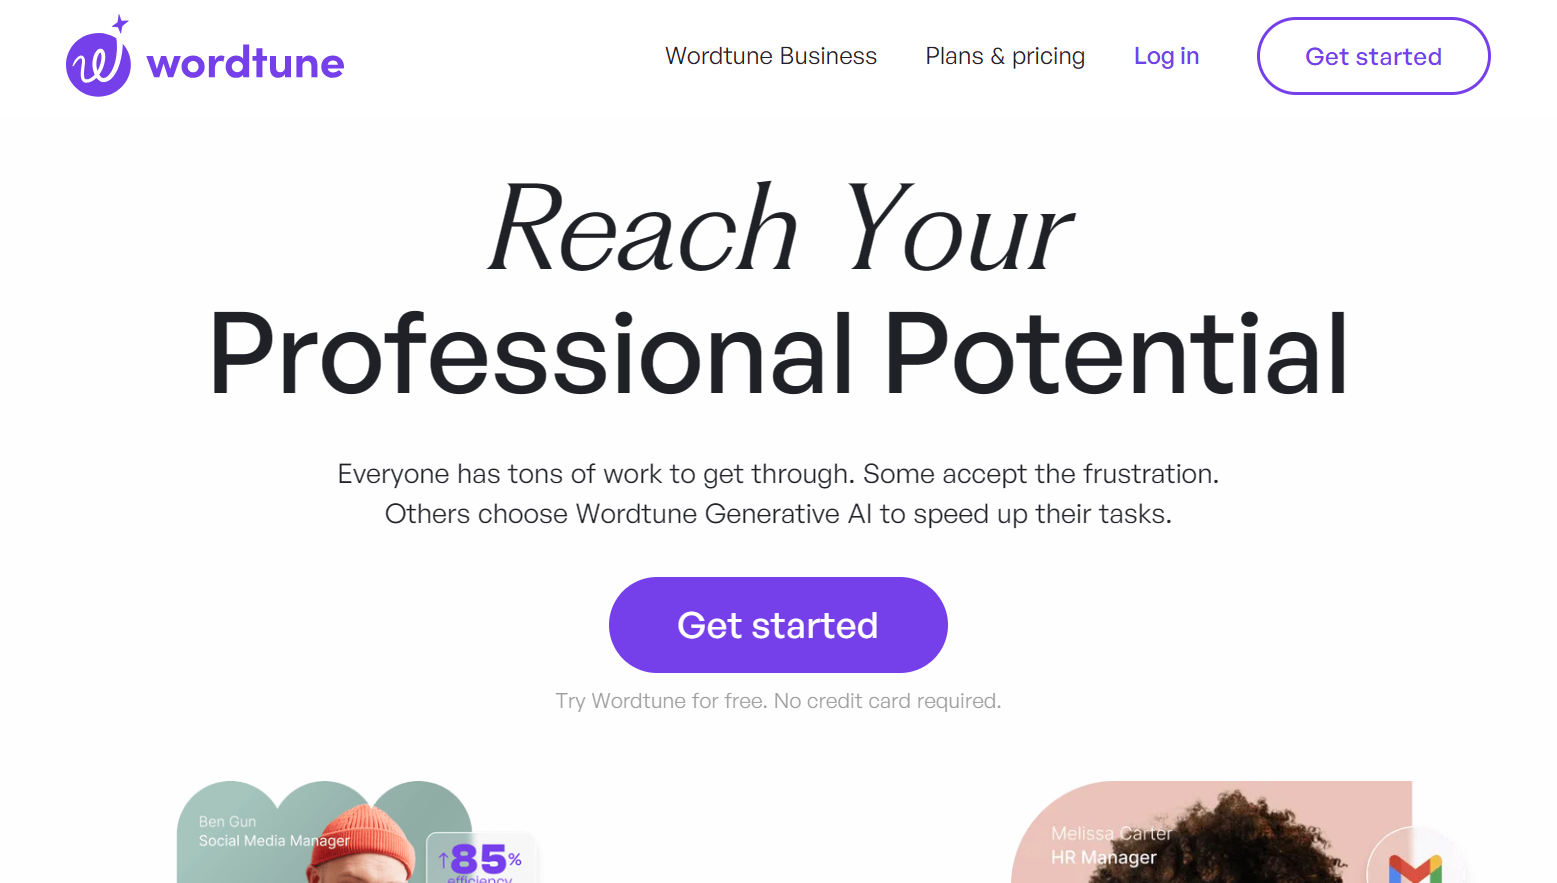 wordtune.com – Reach your professional potential